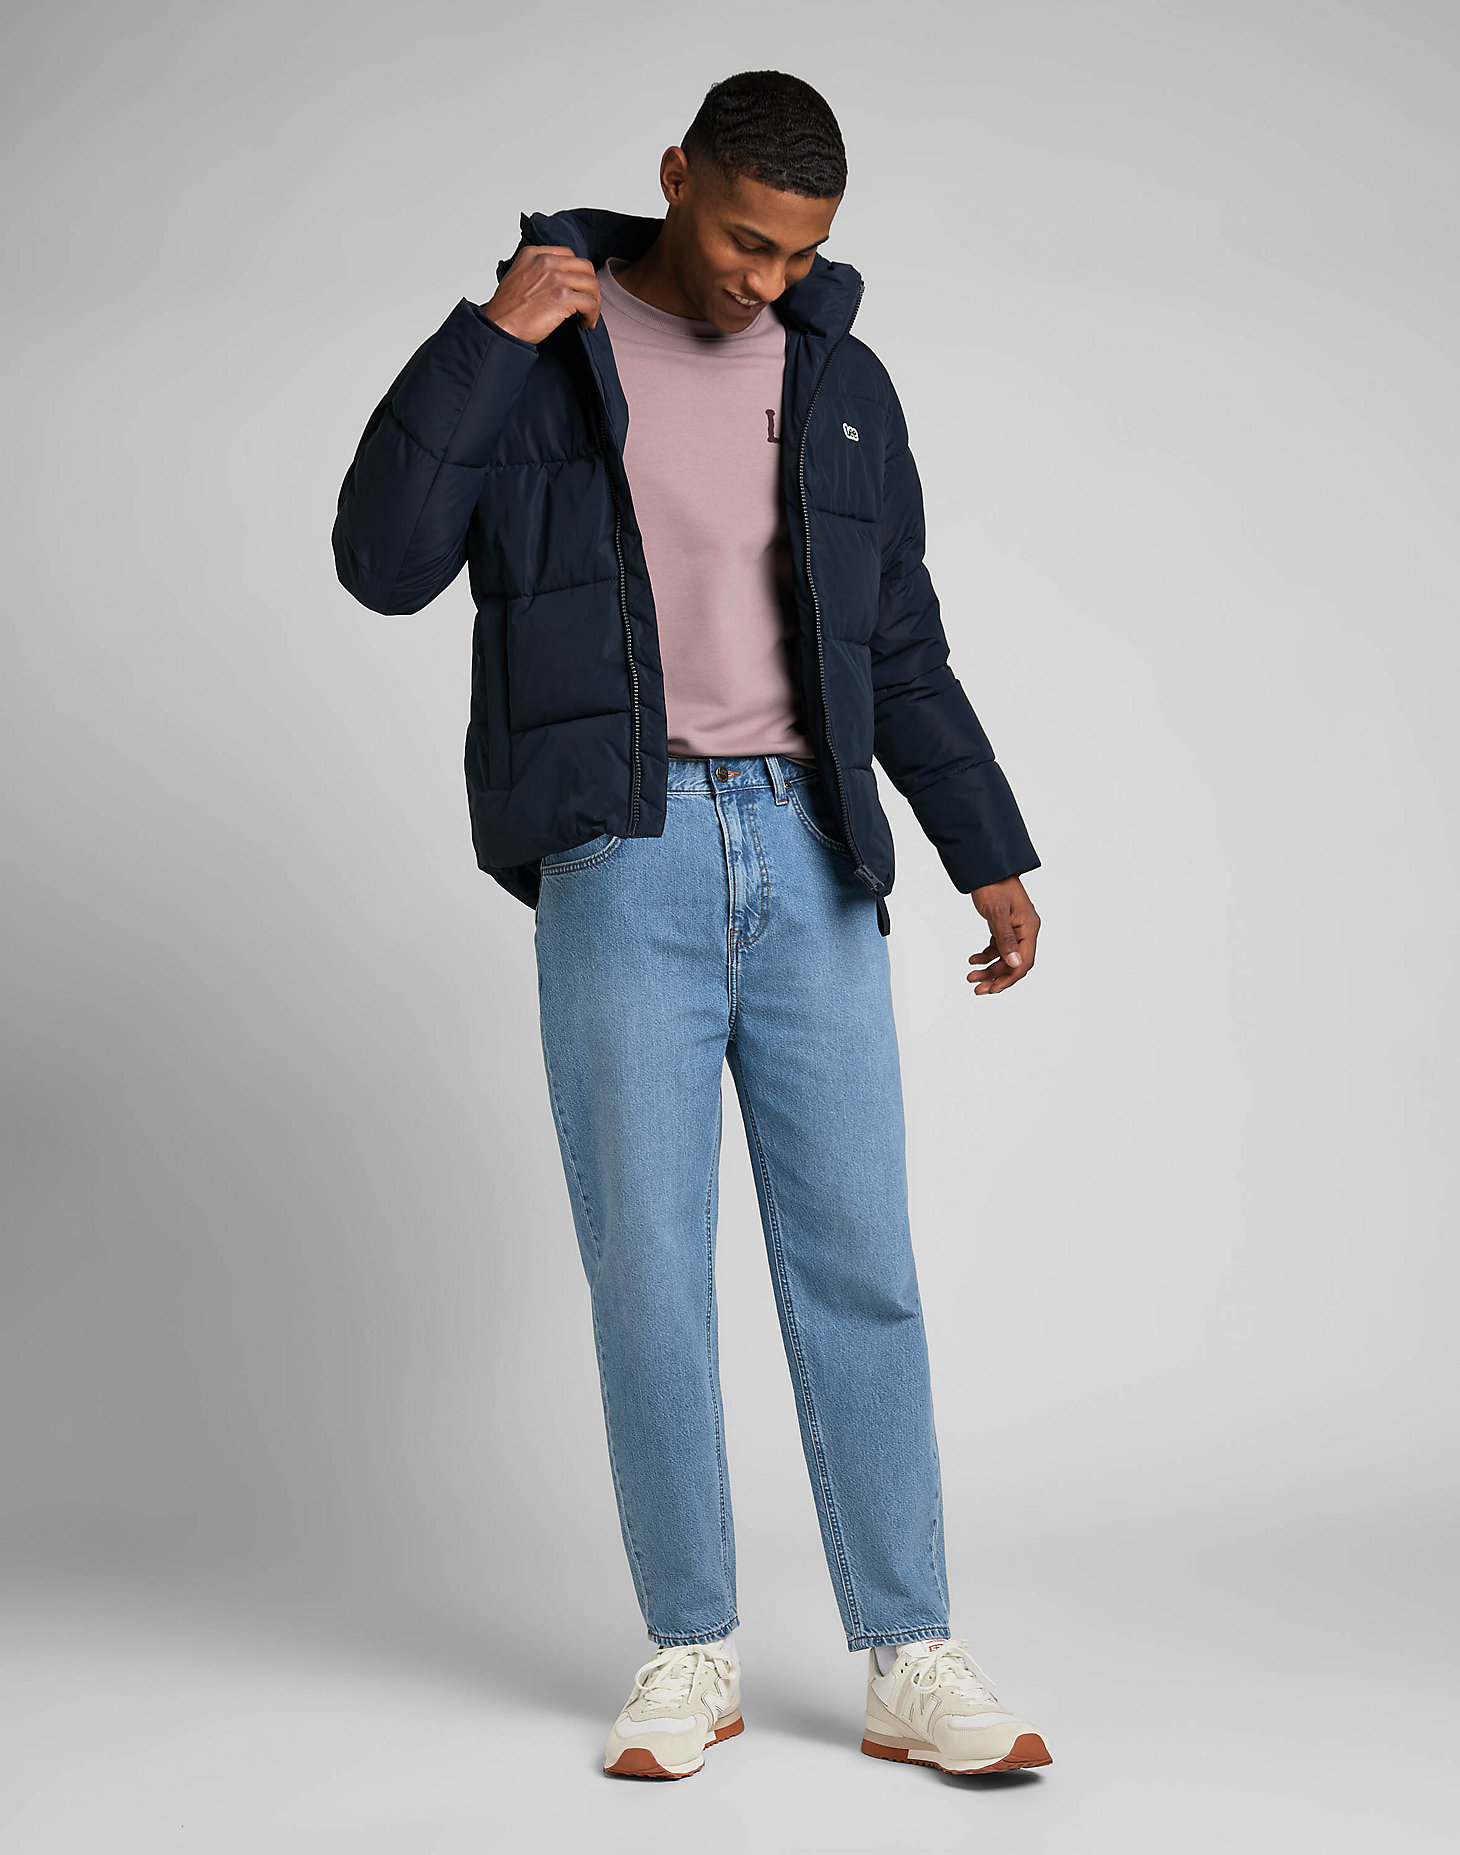 Puffer Jacket in Sky Captain alternative view 2